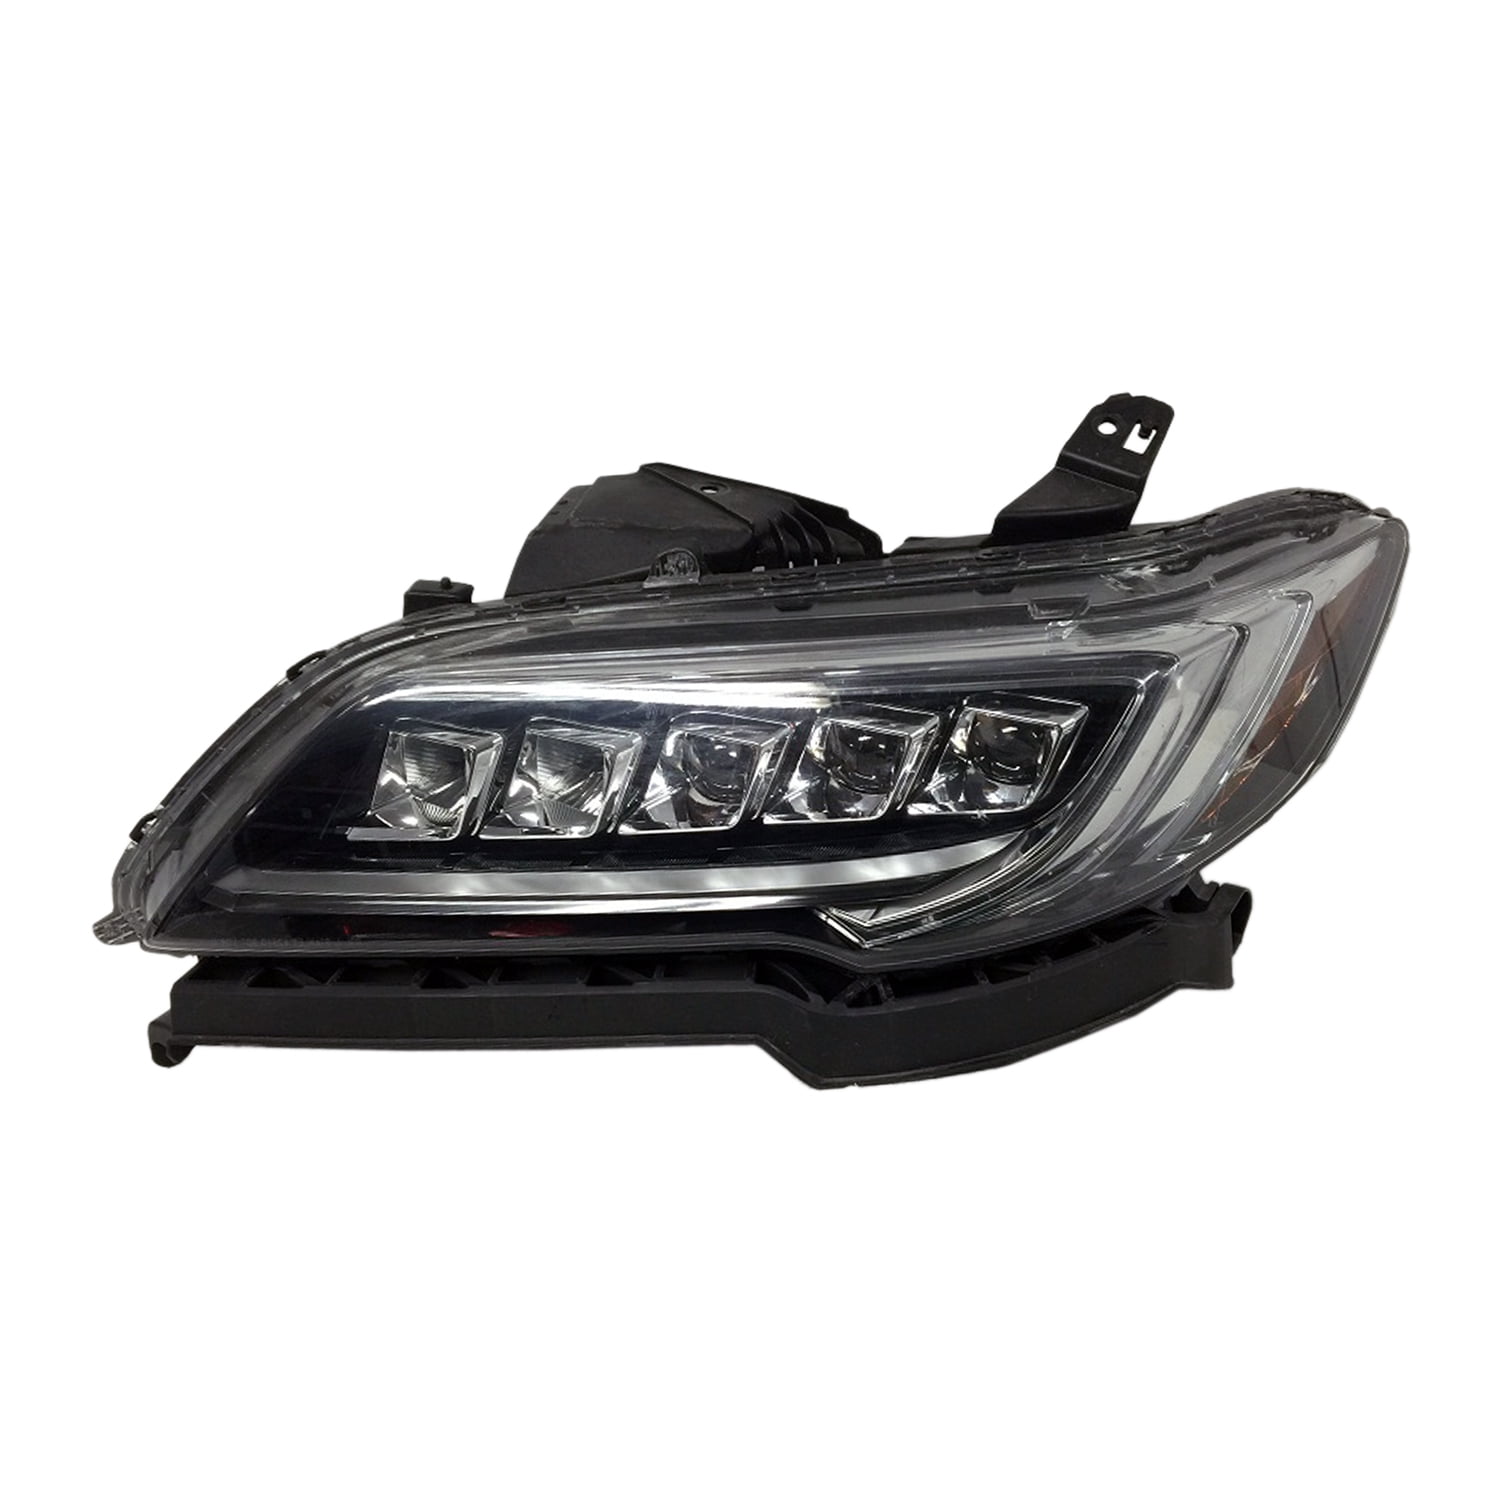 GO-PARTS Replacement for 2016 2018 Acura RDX Headlight Assembly Right  (Passenger) 33100-TX4-A51 AC2503128 Replacement For Acura RDX